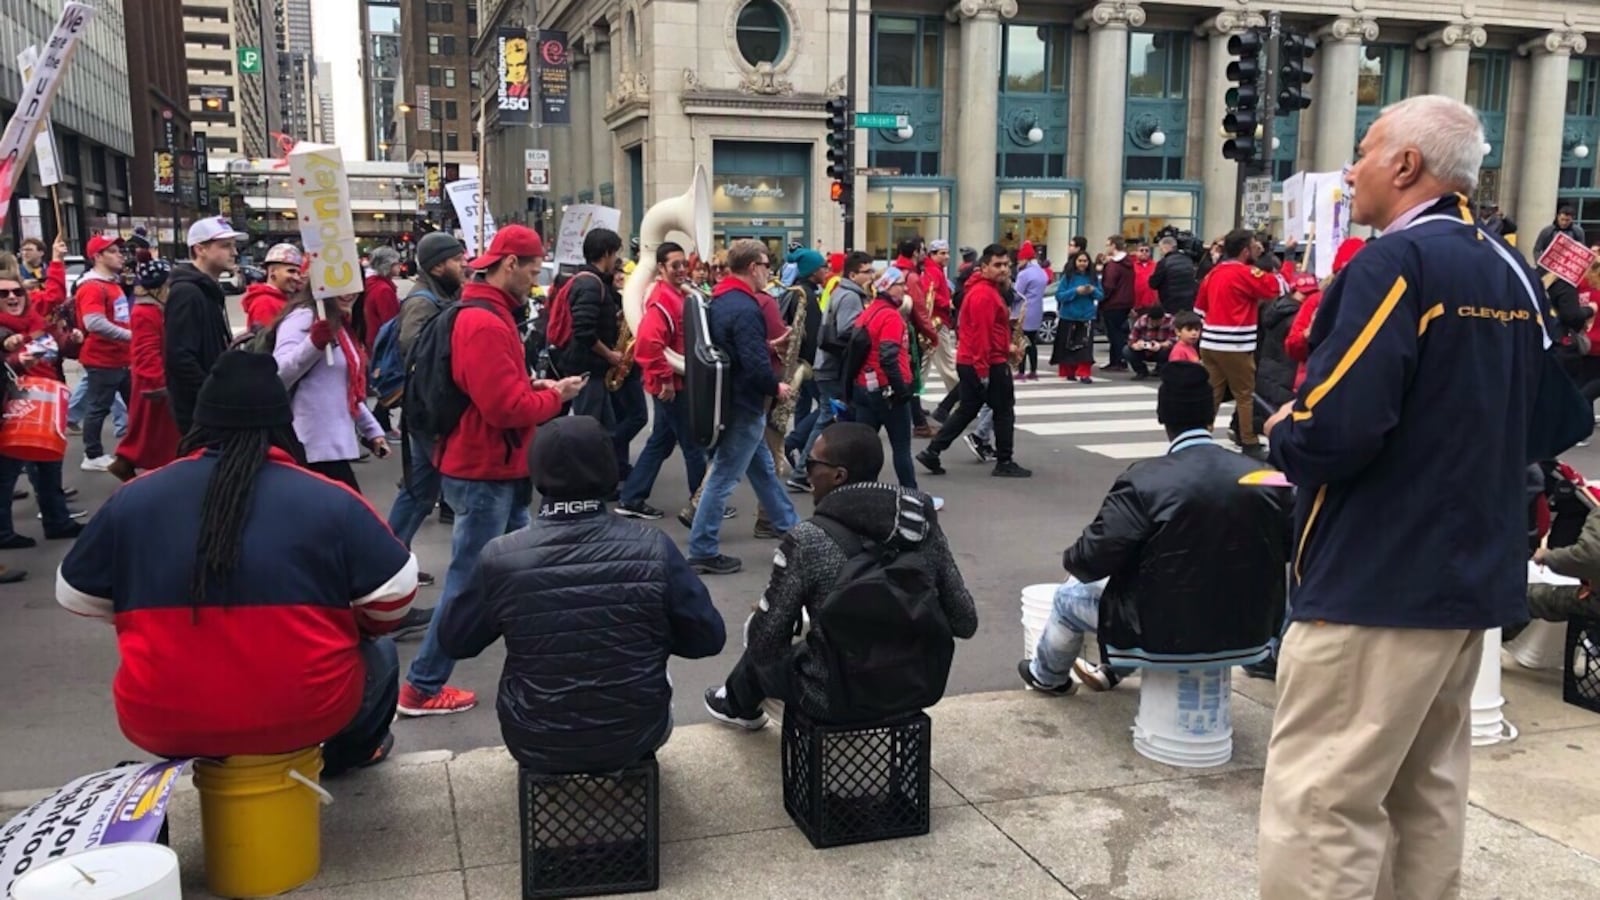 Chicago Teachers Union members and supporters ended the seventh day of their strike with a rally that shut down traffic in parts of downtown Chicago.